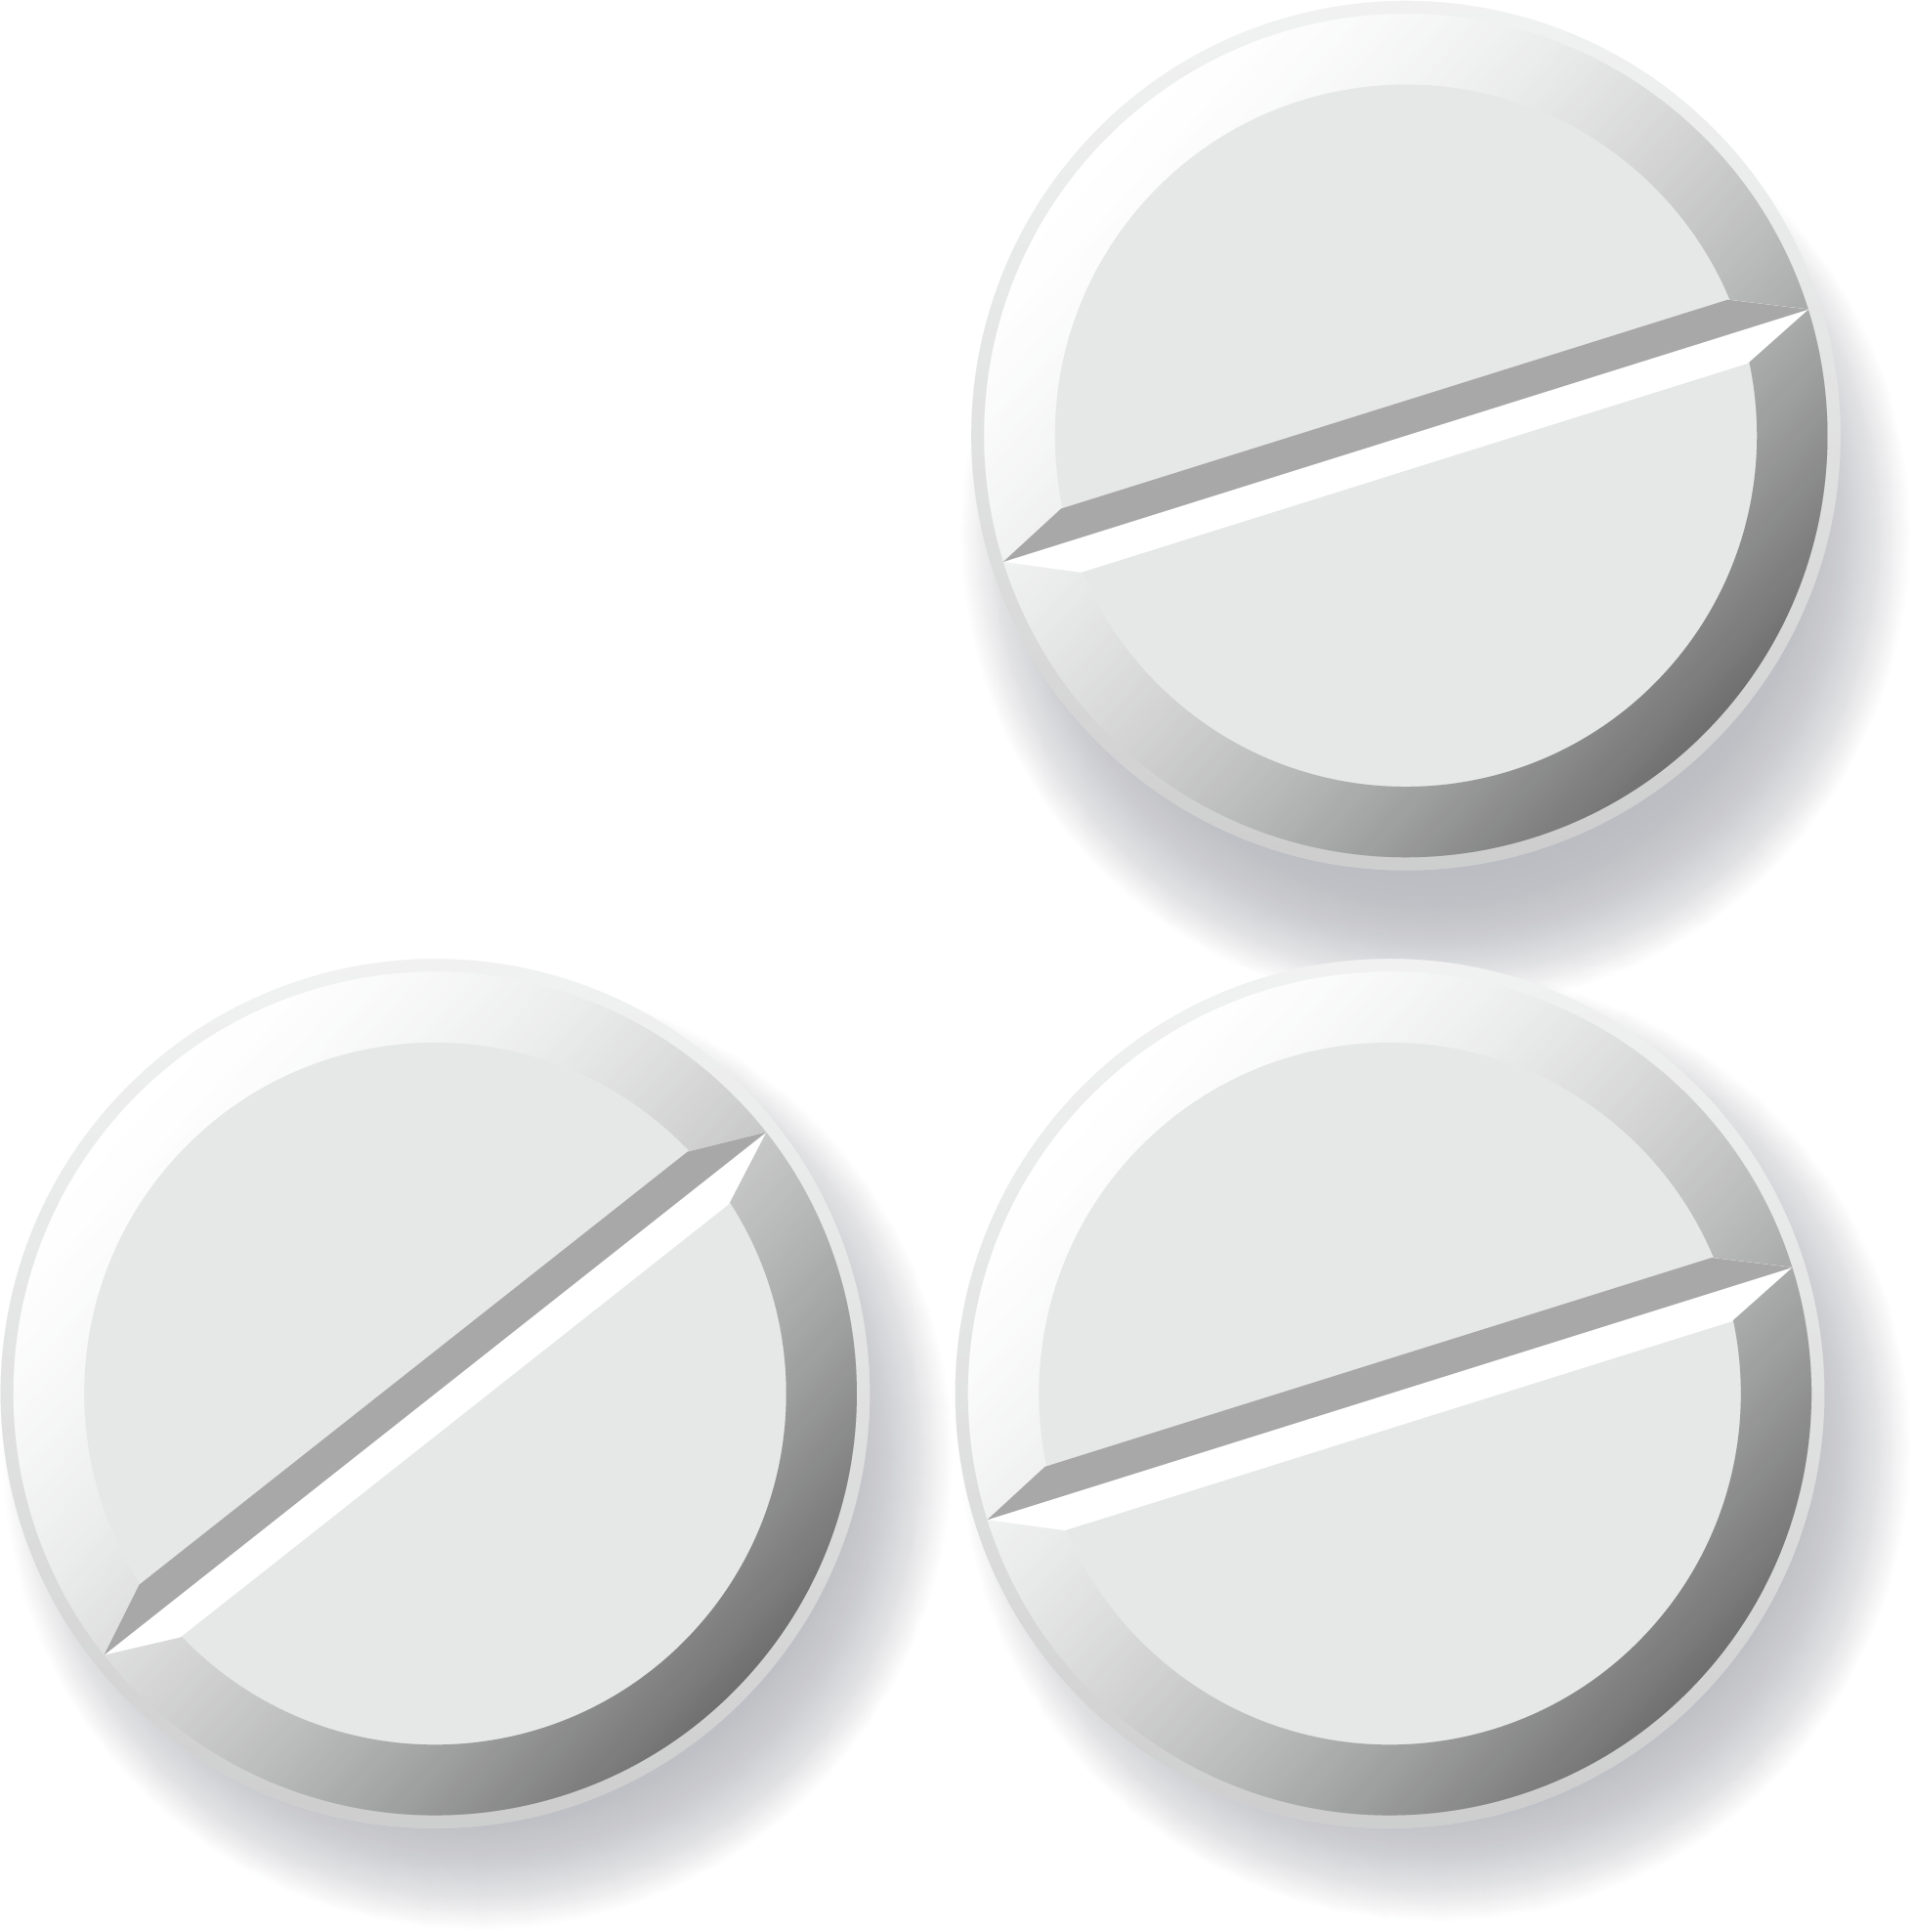 A Group Of White Pills